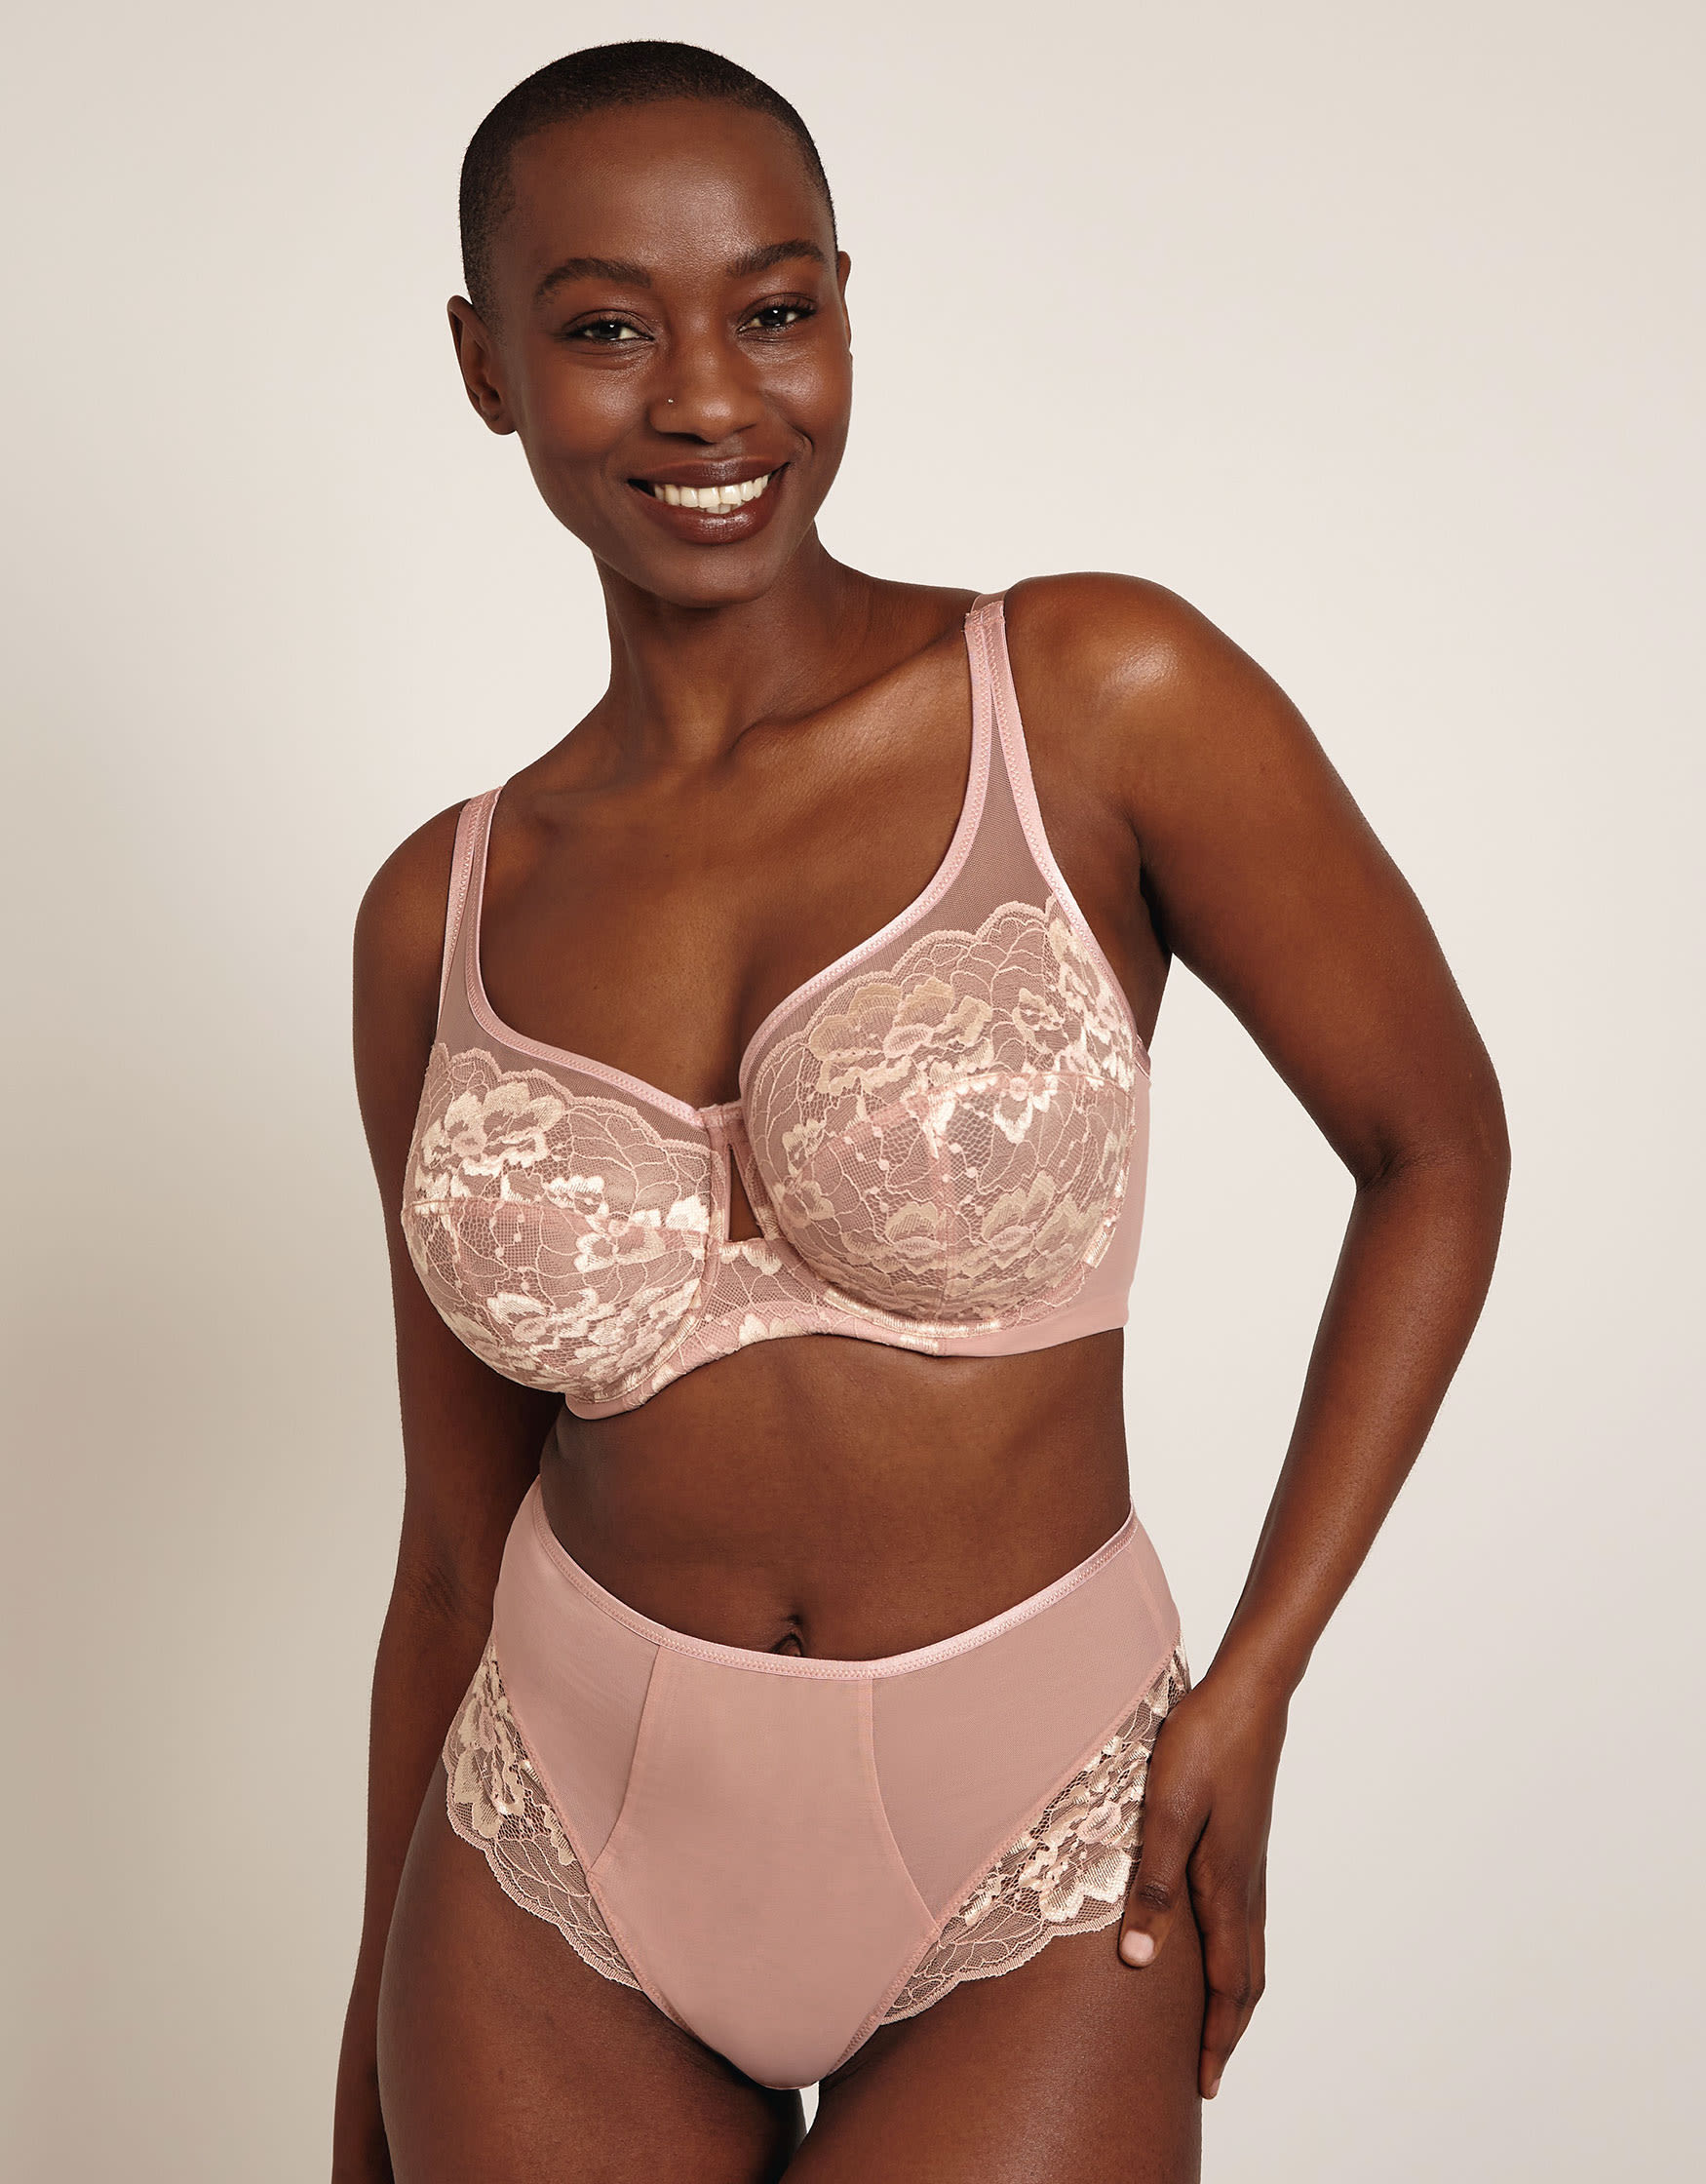 Plus Size Bras 36E, Bras for Large Breasts